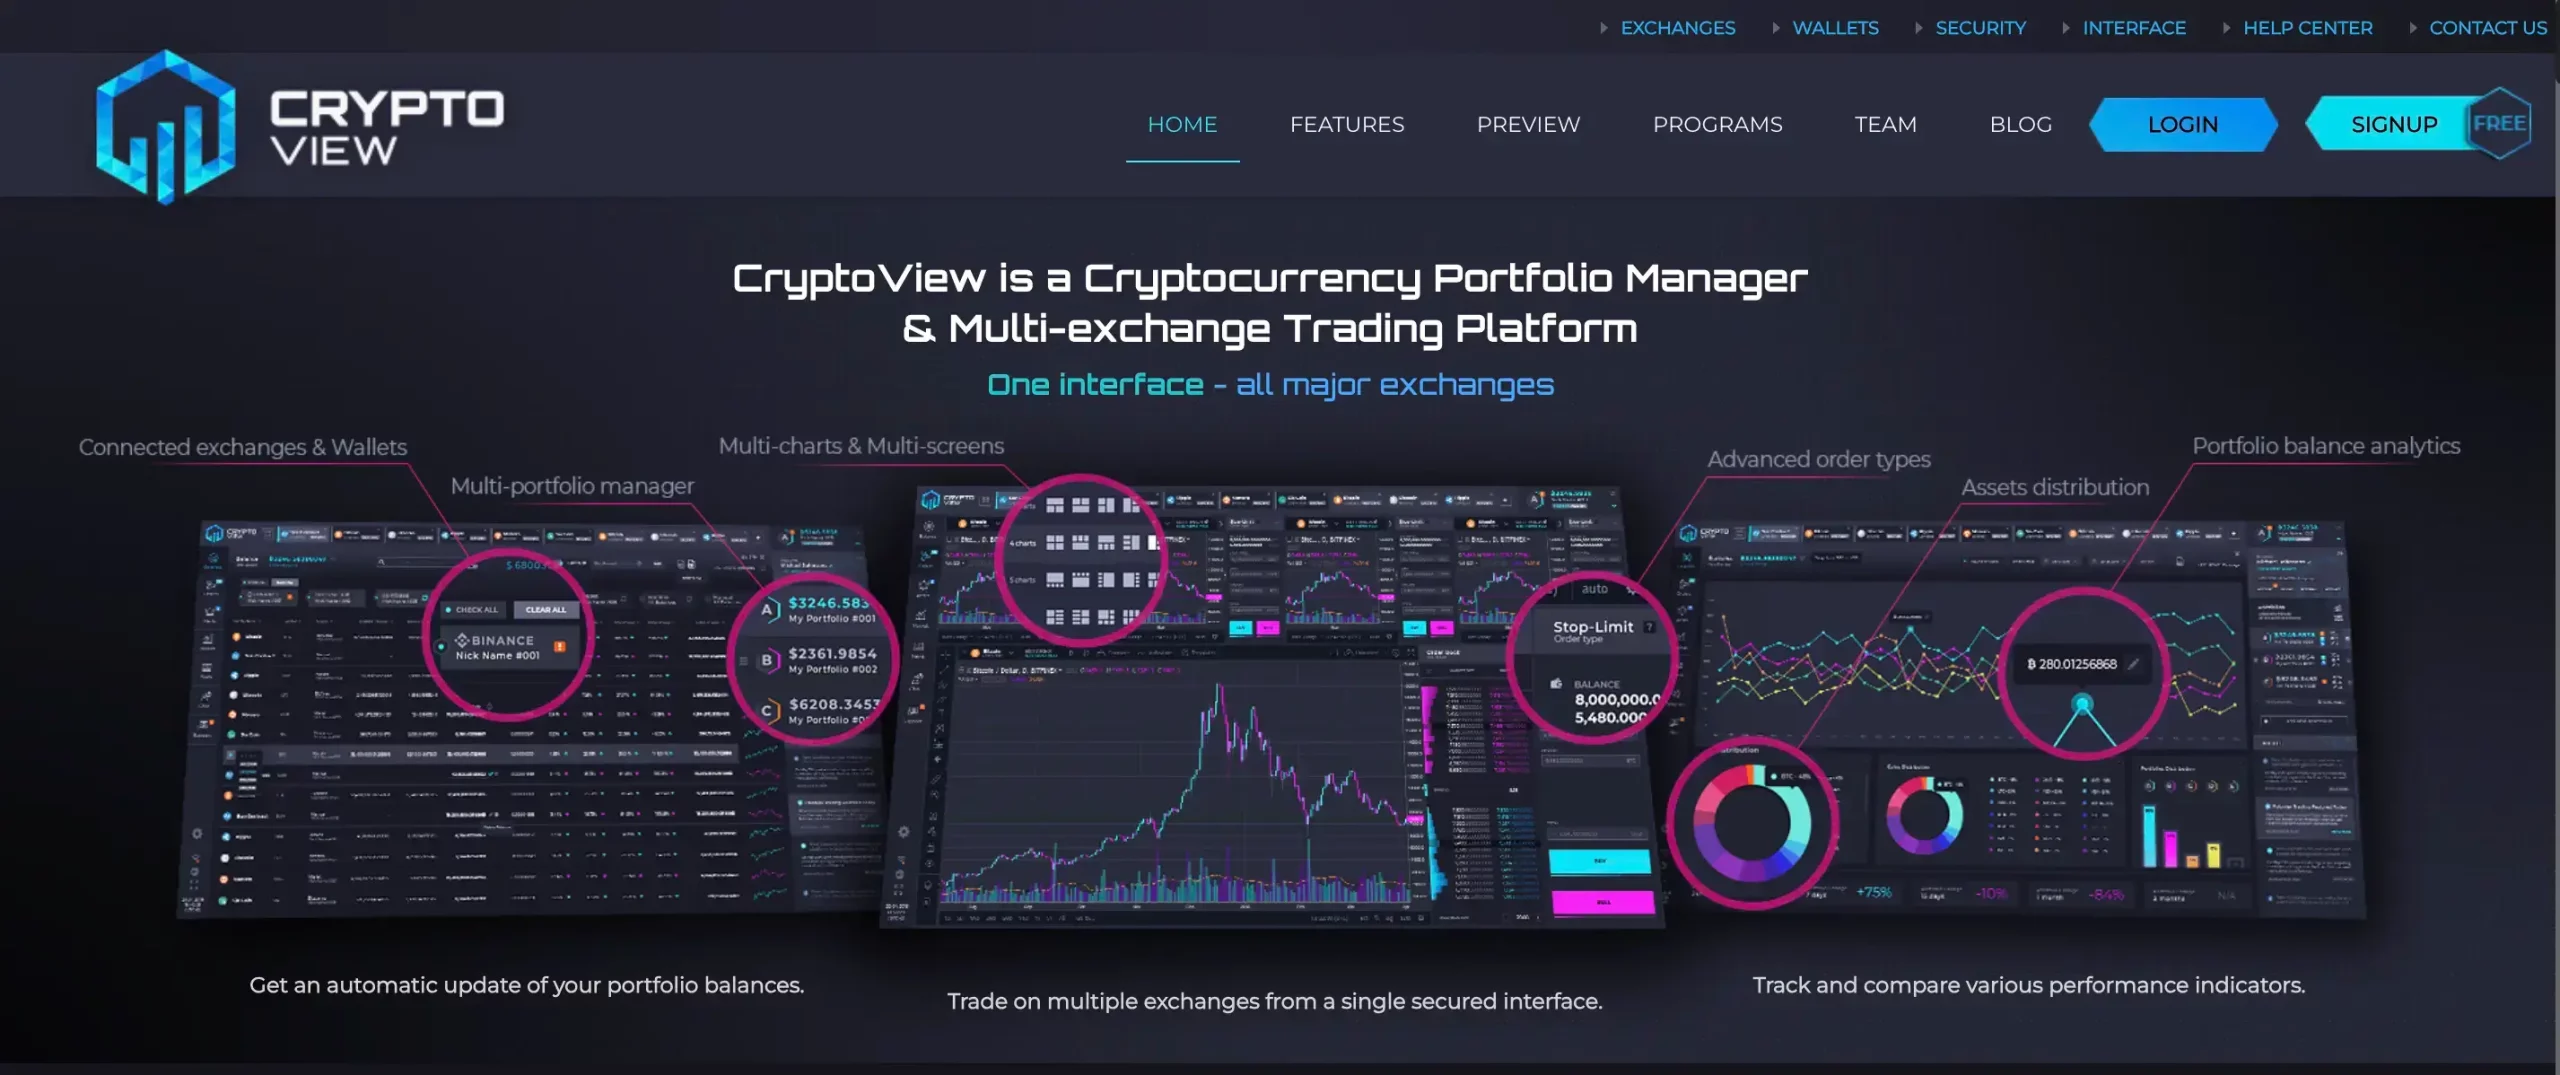 12. An Extensive Crypto Charting Tool: CryptoView